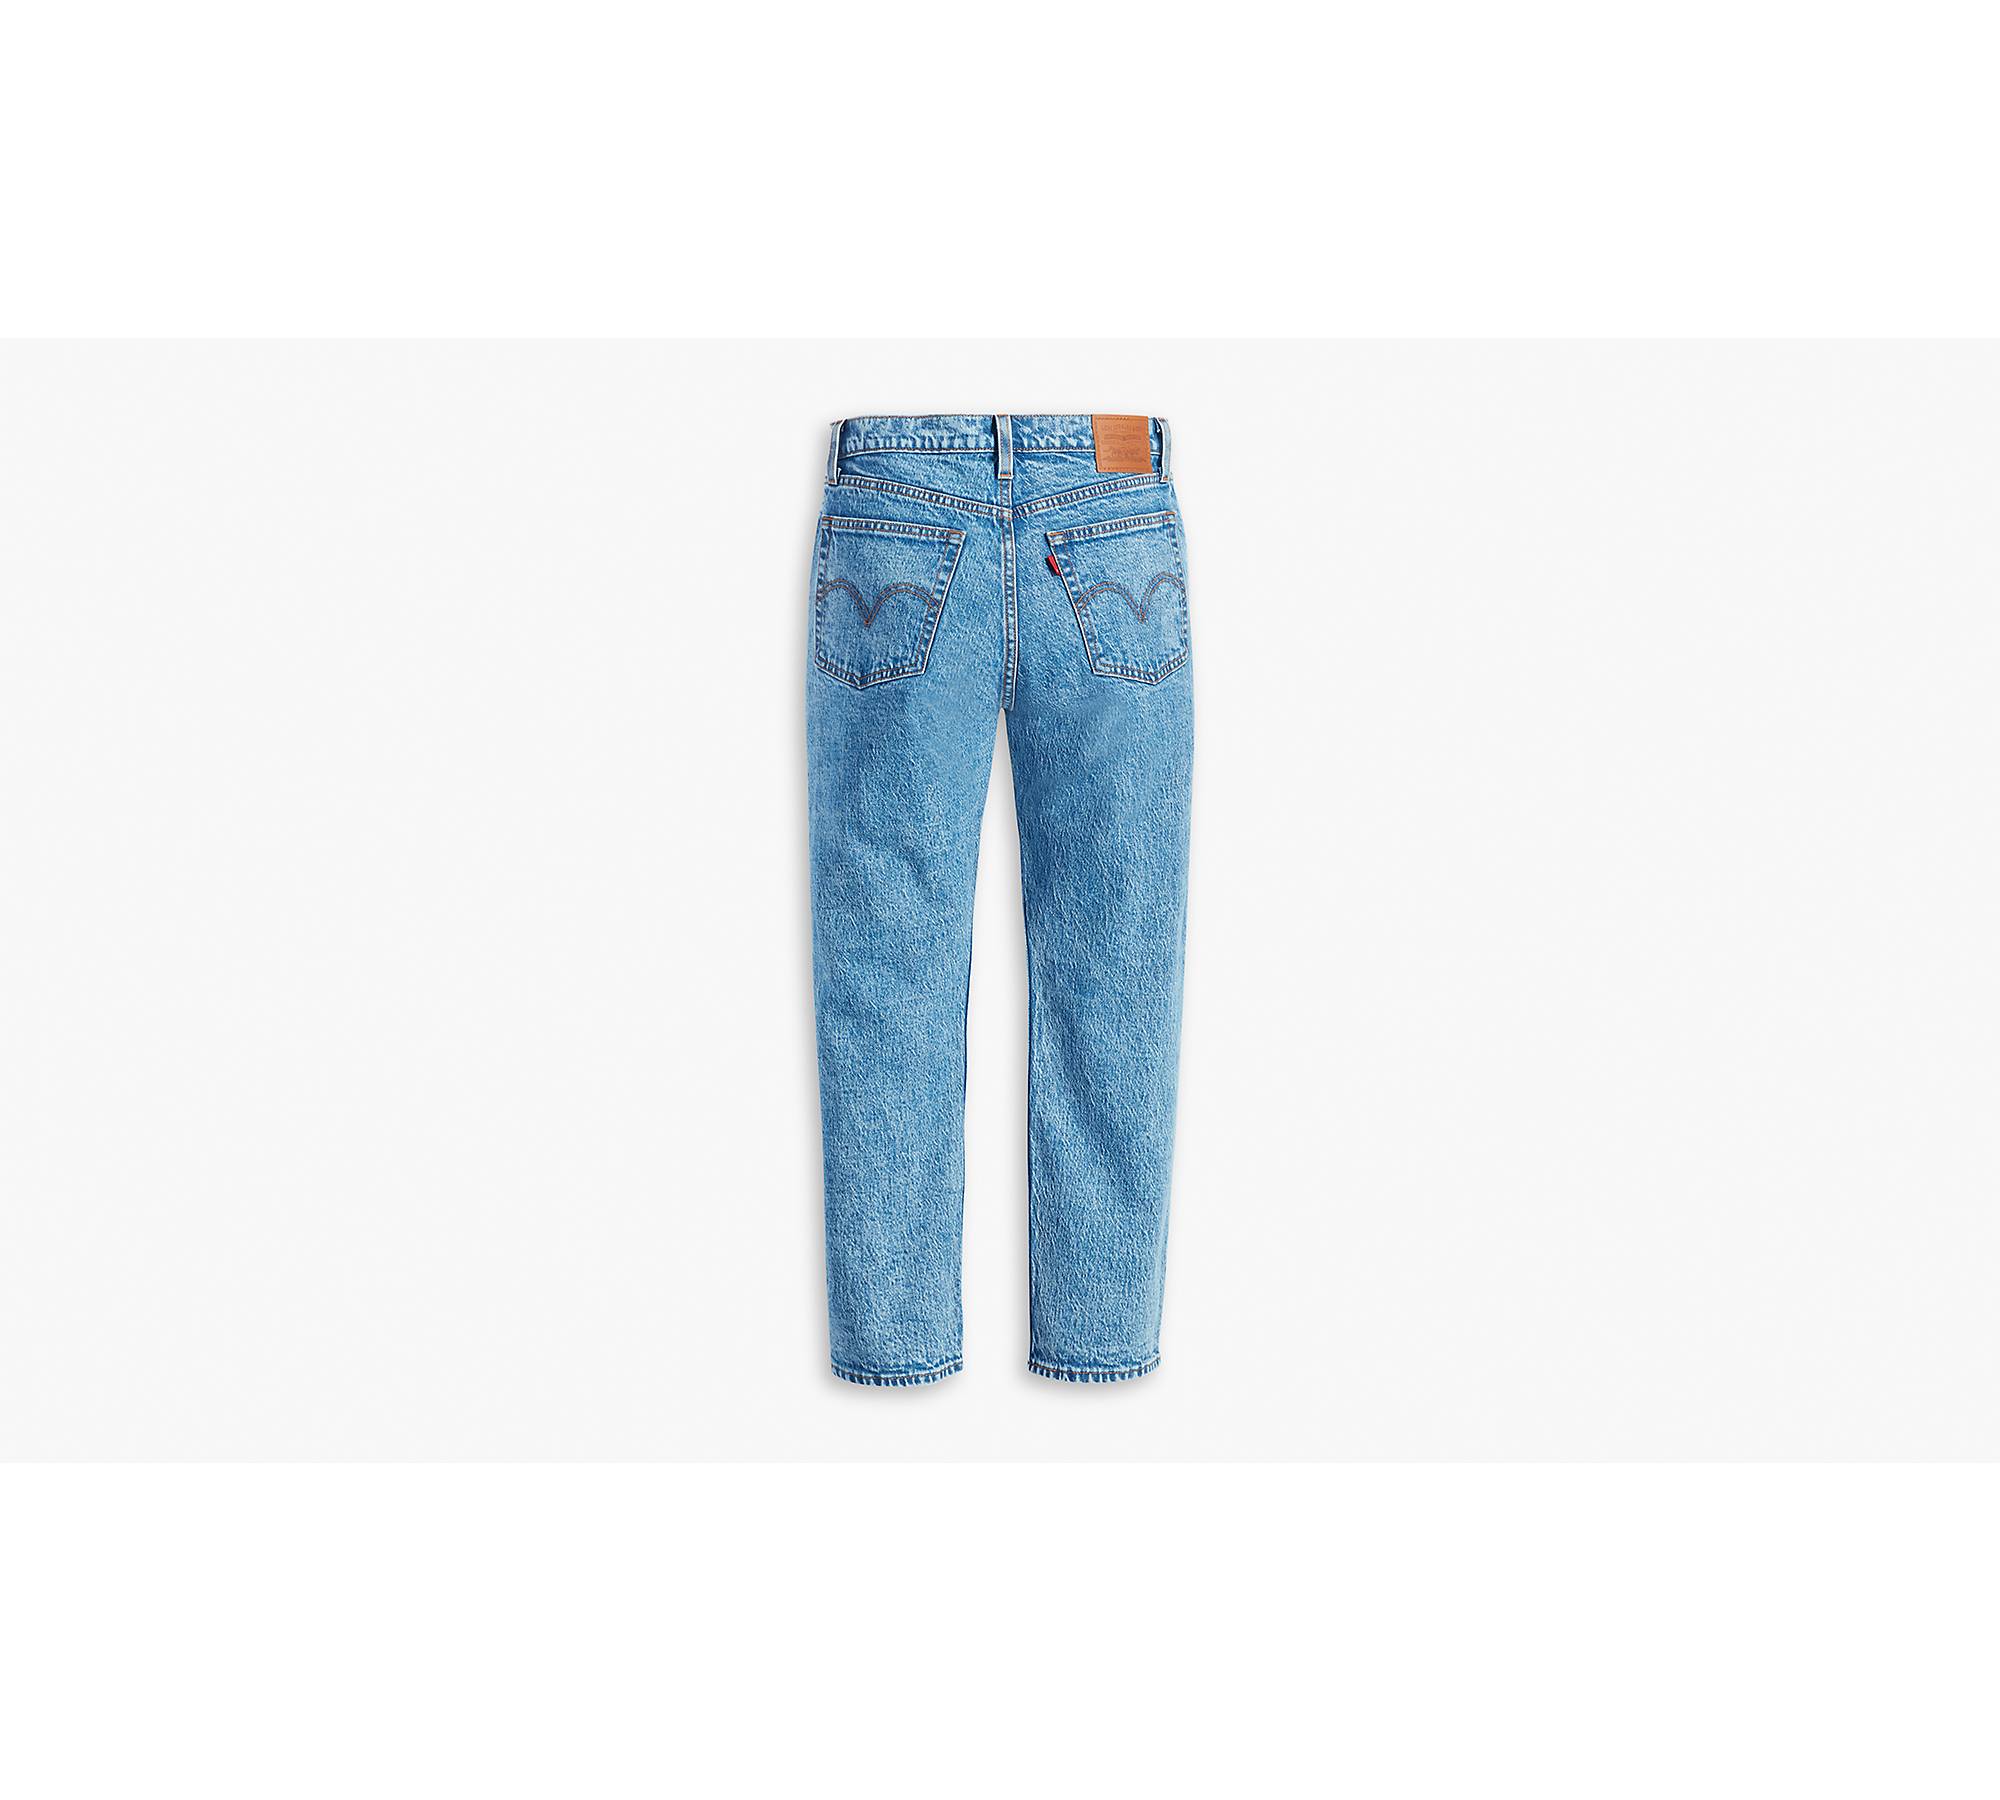 Levi's Wedgie Straight Luxor Again 34964-0121 - Free Shipping at